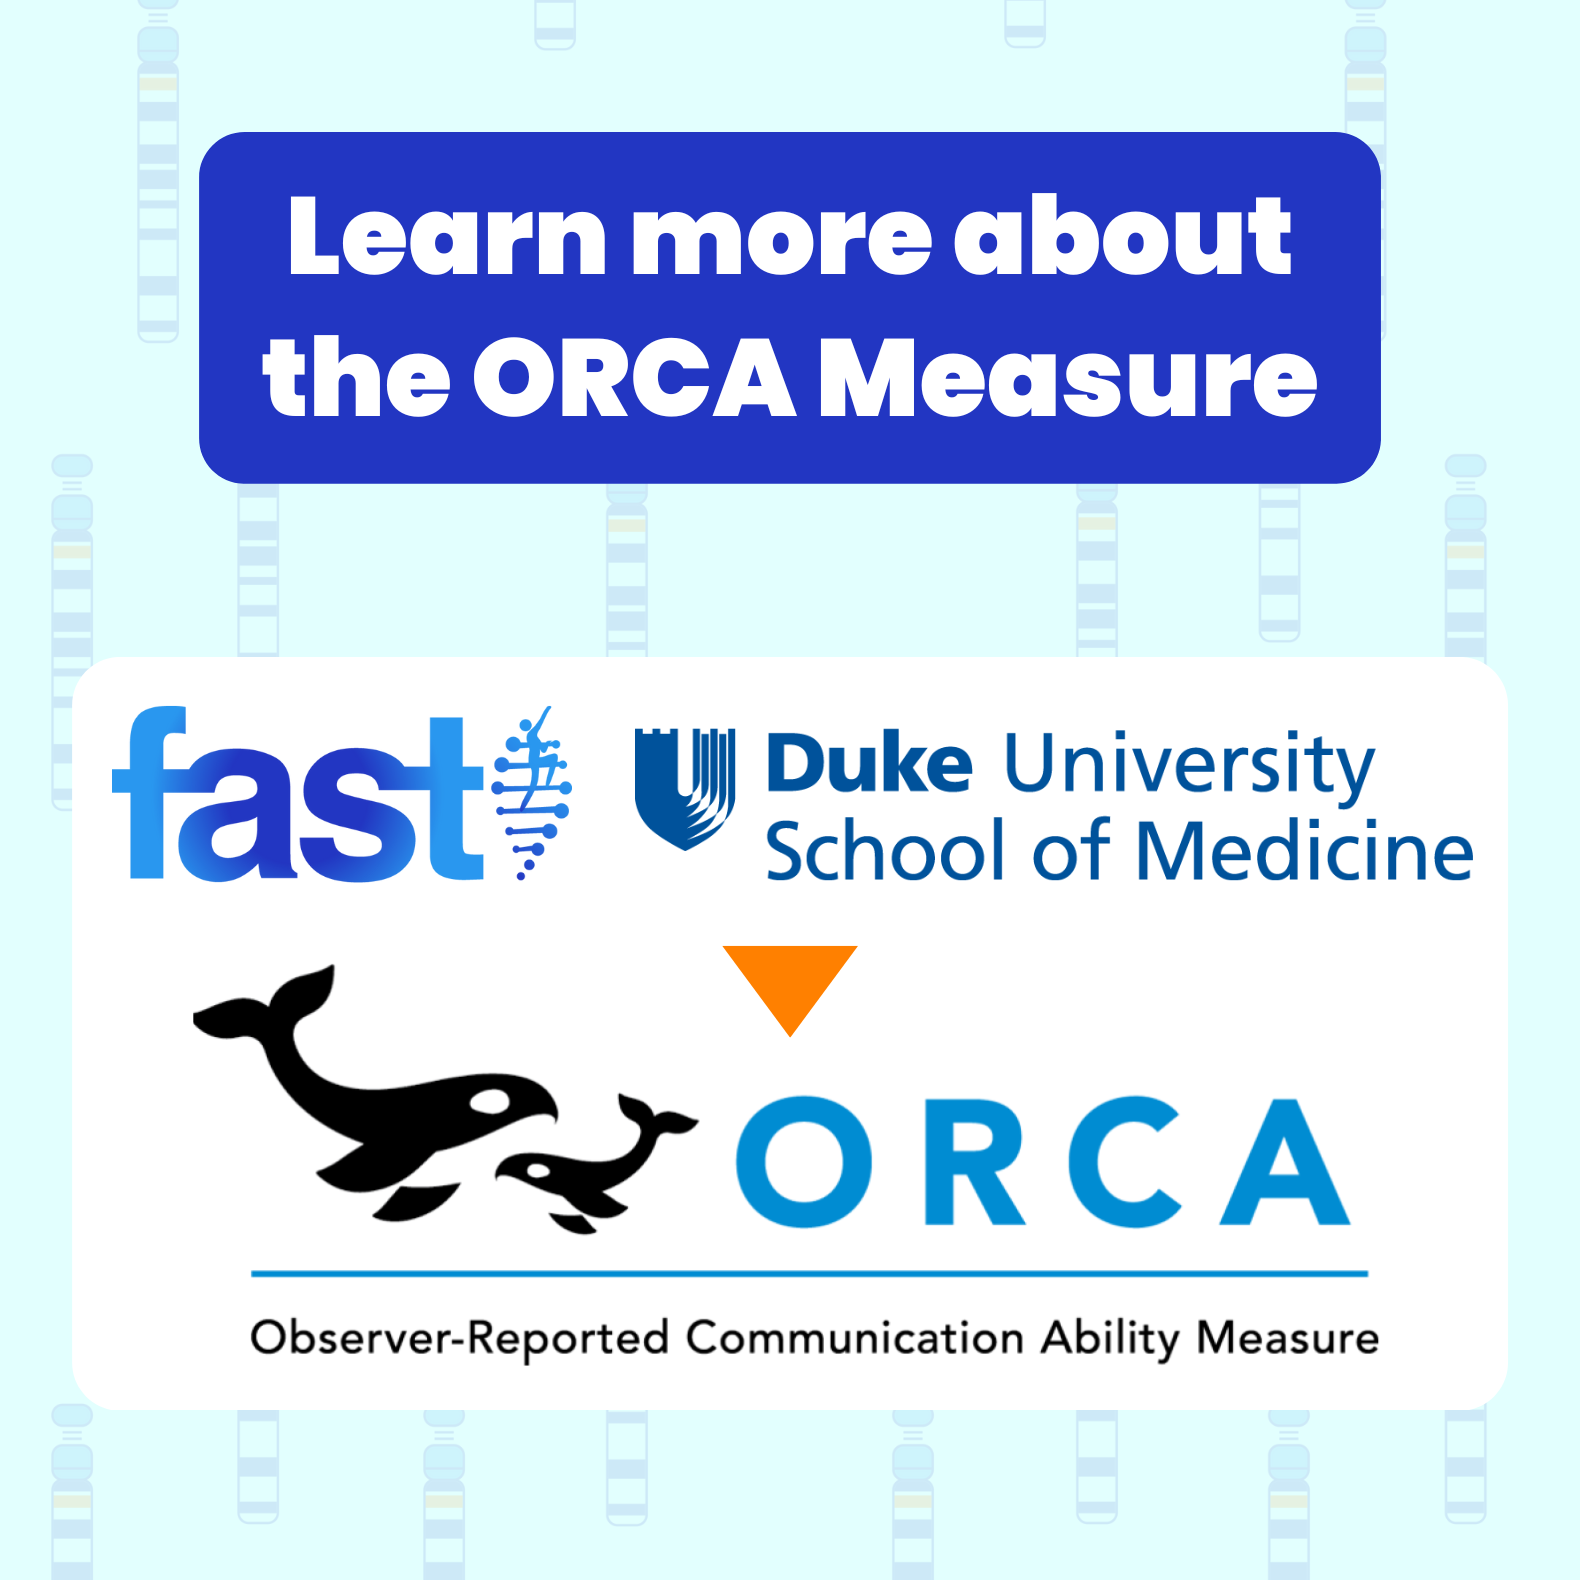 Learn more about the ORCA Measure, with the Duke University School of Medicine logo and the ORCA (Observer-Reported Communication Ability Measure) logo